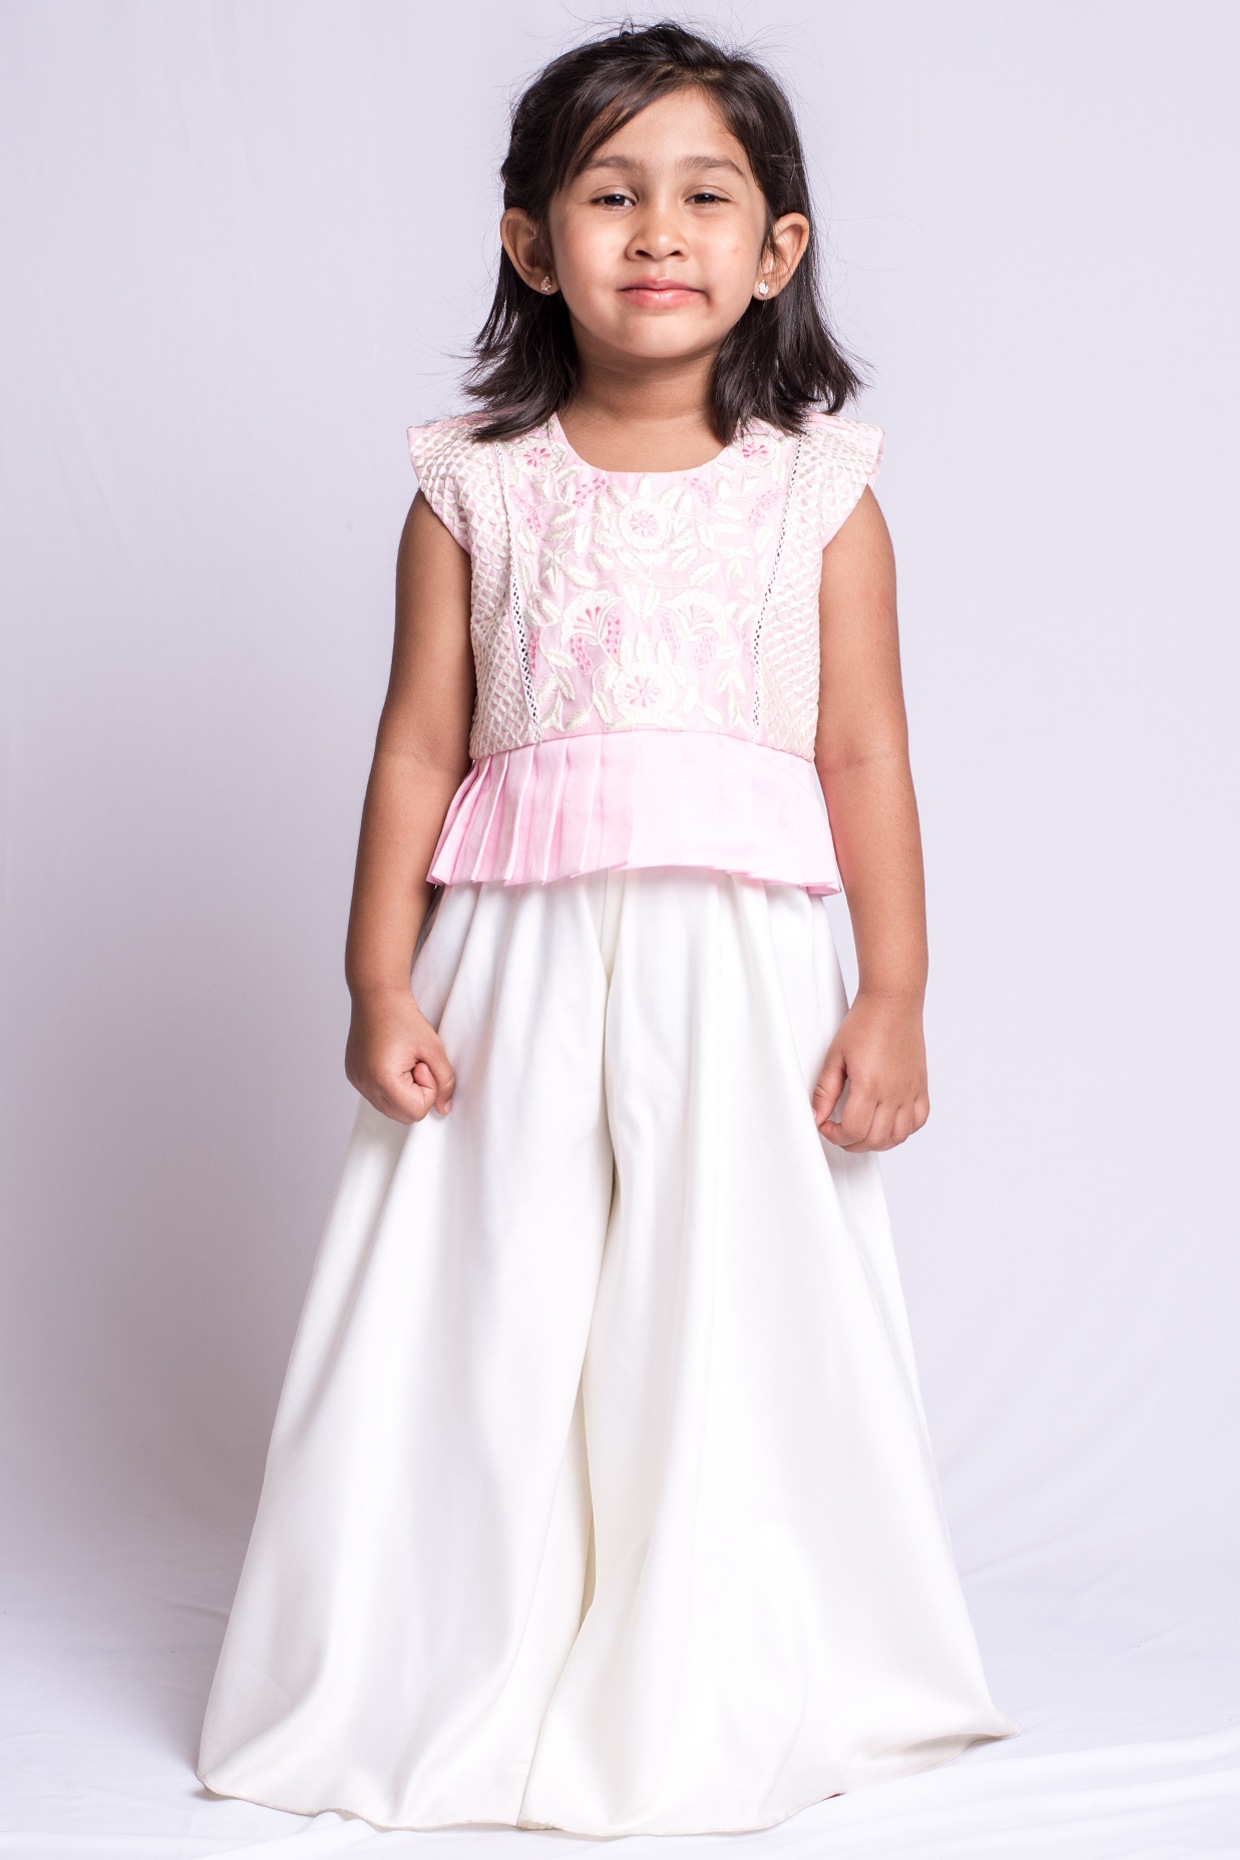 InCity Kids Girls Solid Pleated Wide Leg Dress Pants with Belt Detail